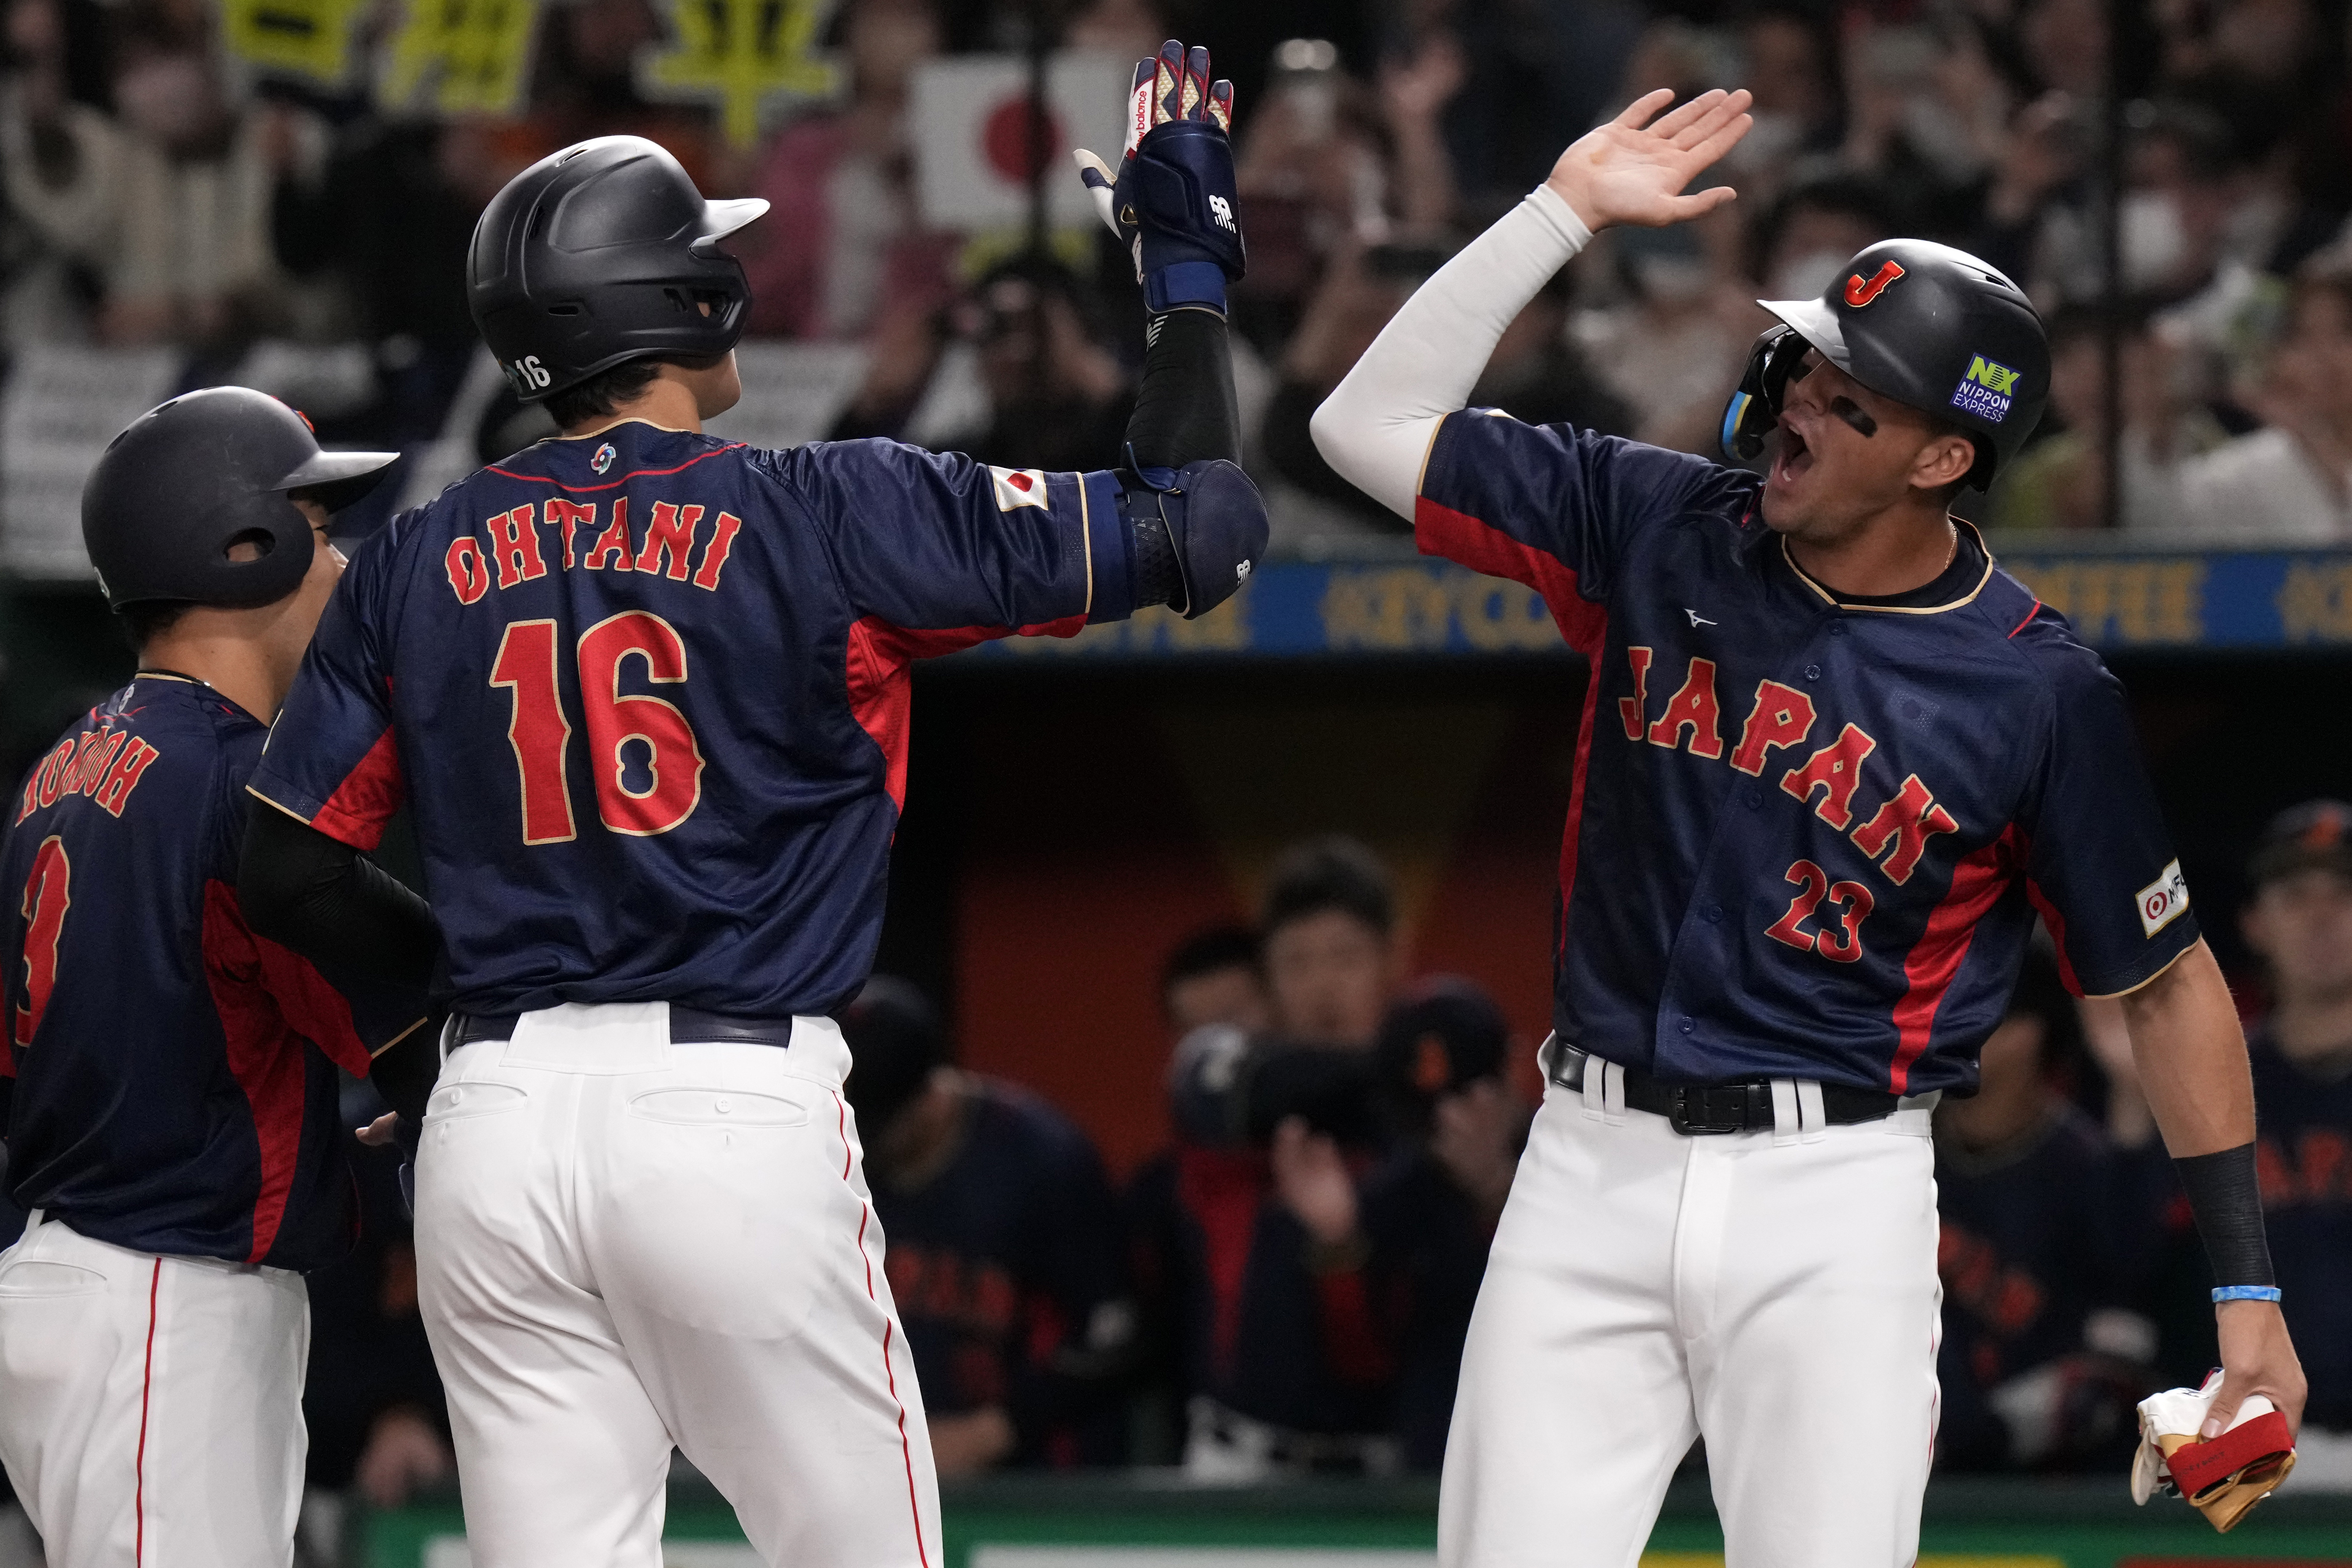 Ohtani closes in style as Japan edge USA for third World Baseball